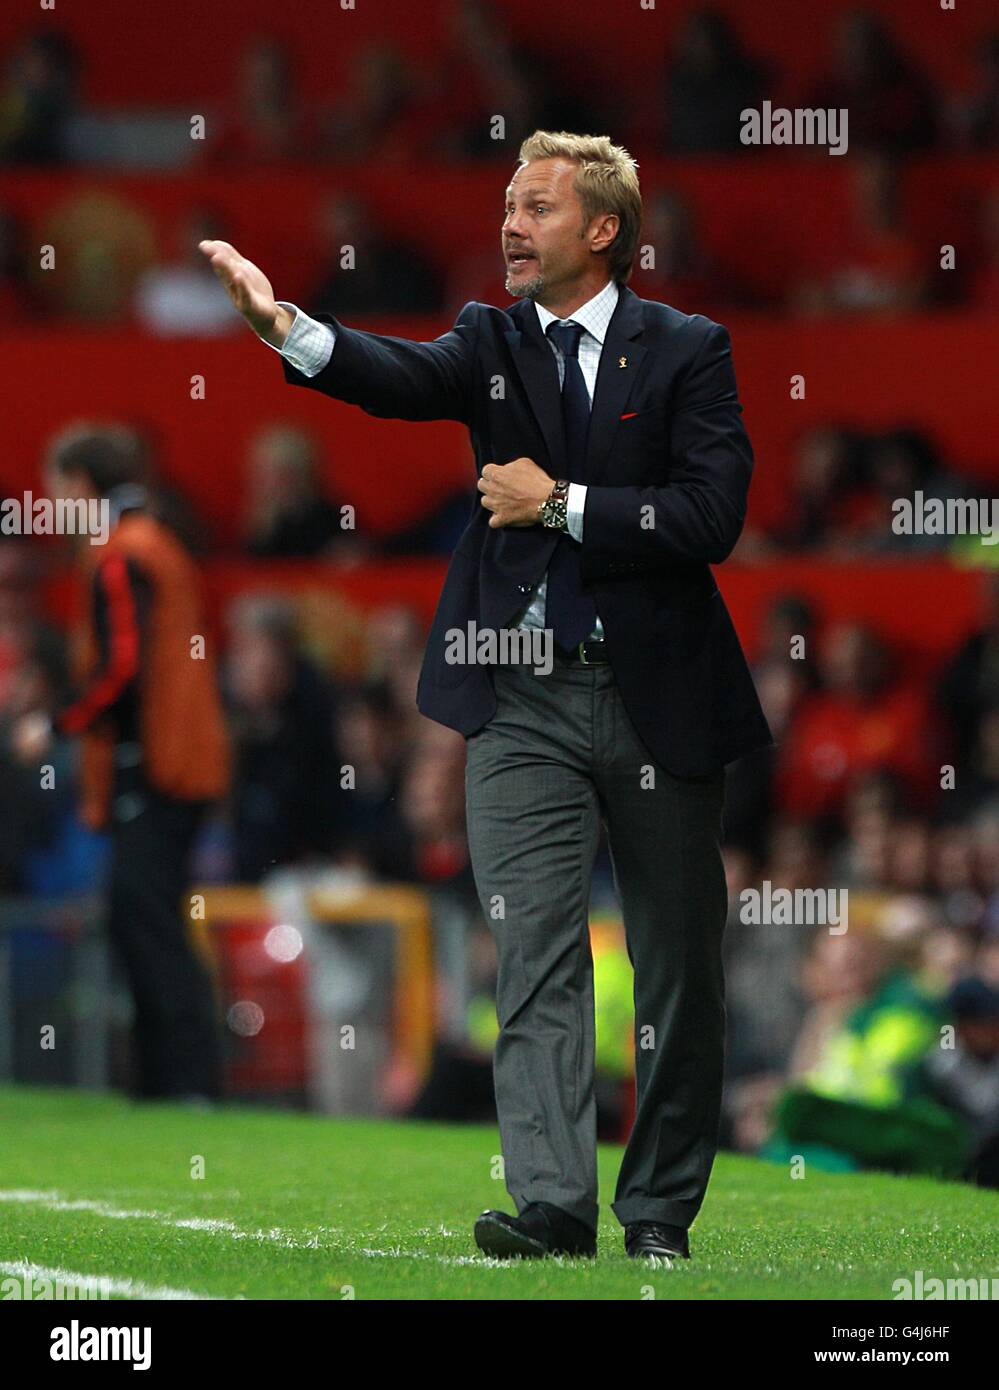 Soccer - UEFA Champions League - Group C - Manchester United v FC Basle - Old Trafford. Basle coach Thorsten Fink gestures on the touchline Stock Photo